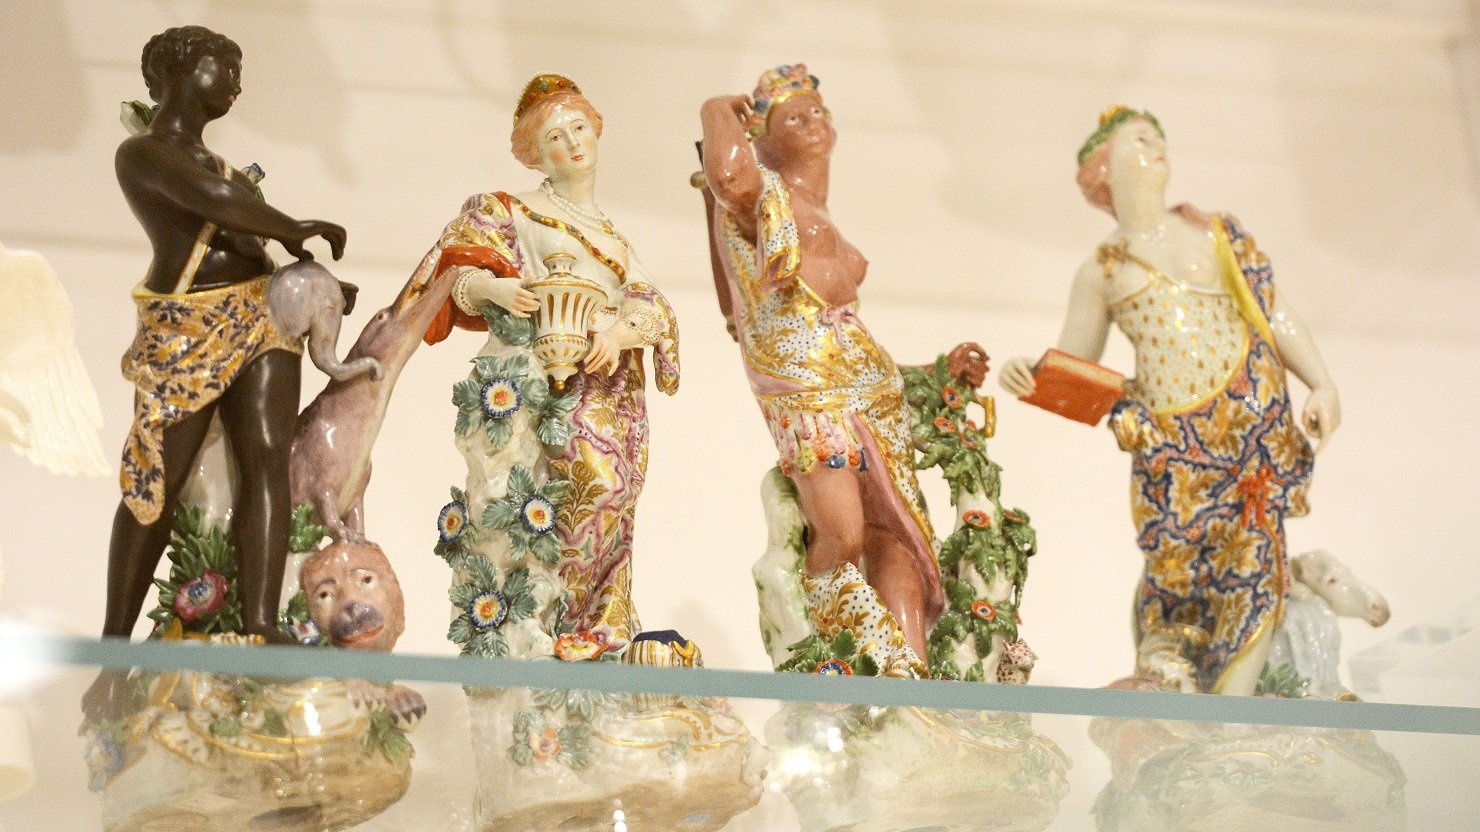 The 'Four Continents' ceramic figurines on display in The Box's art gallery